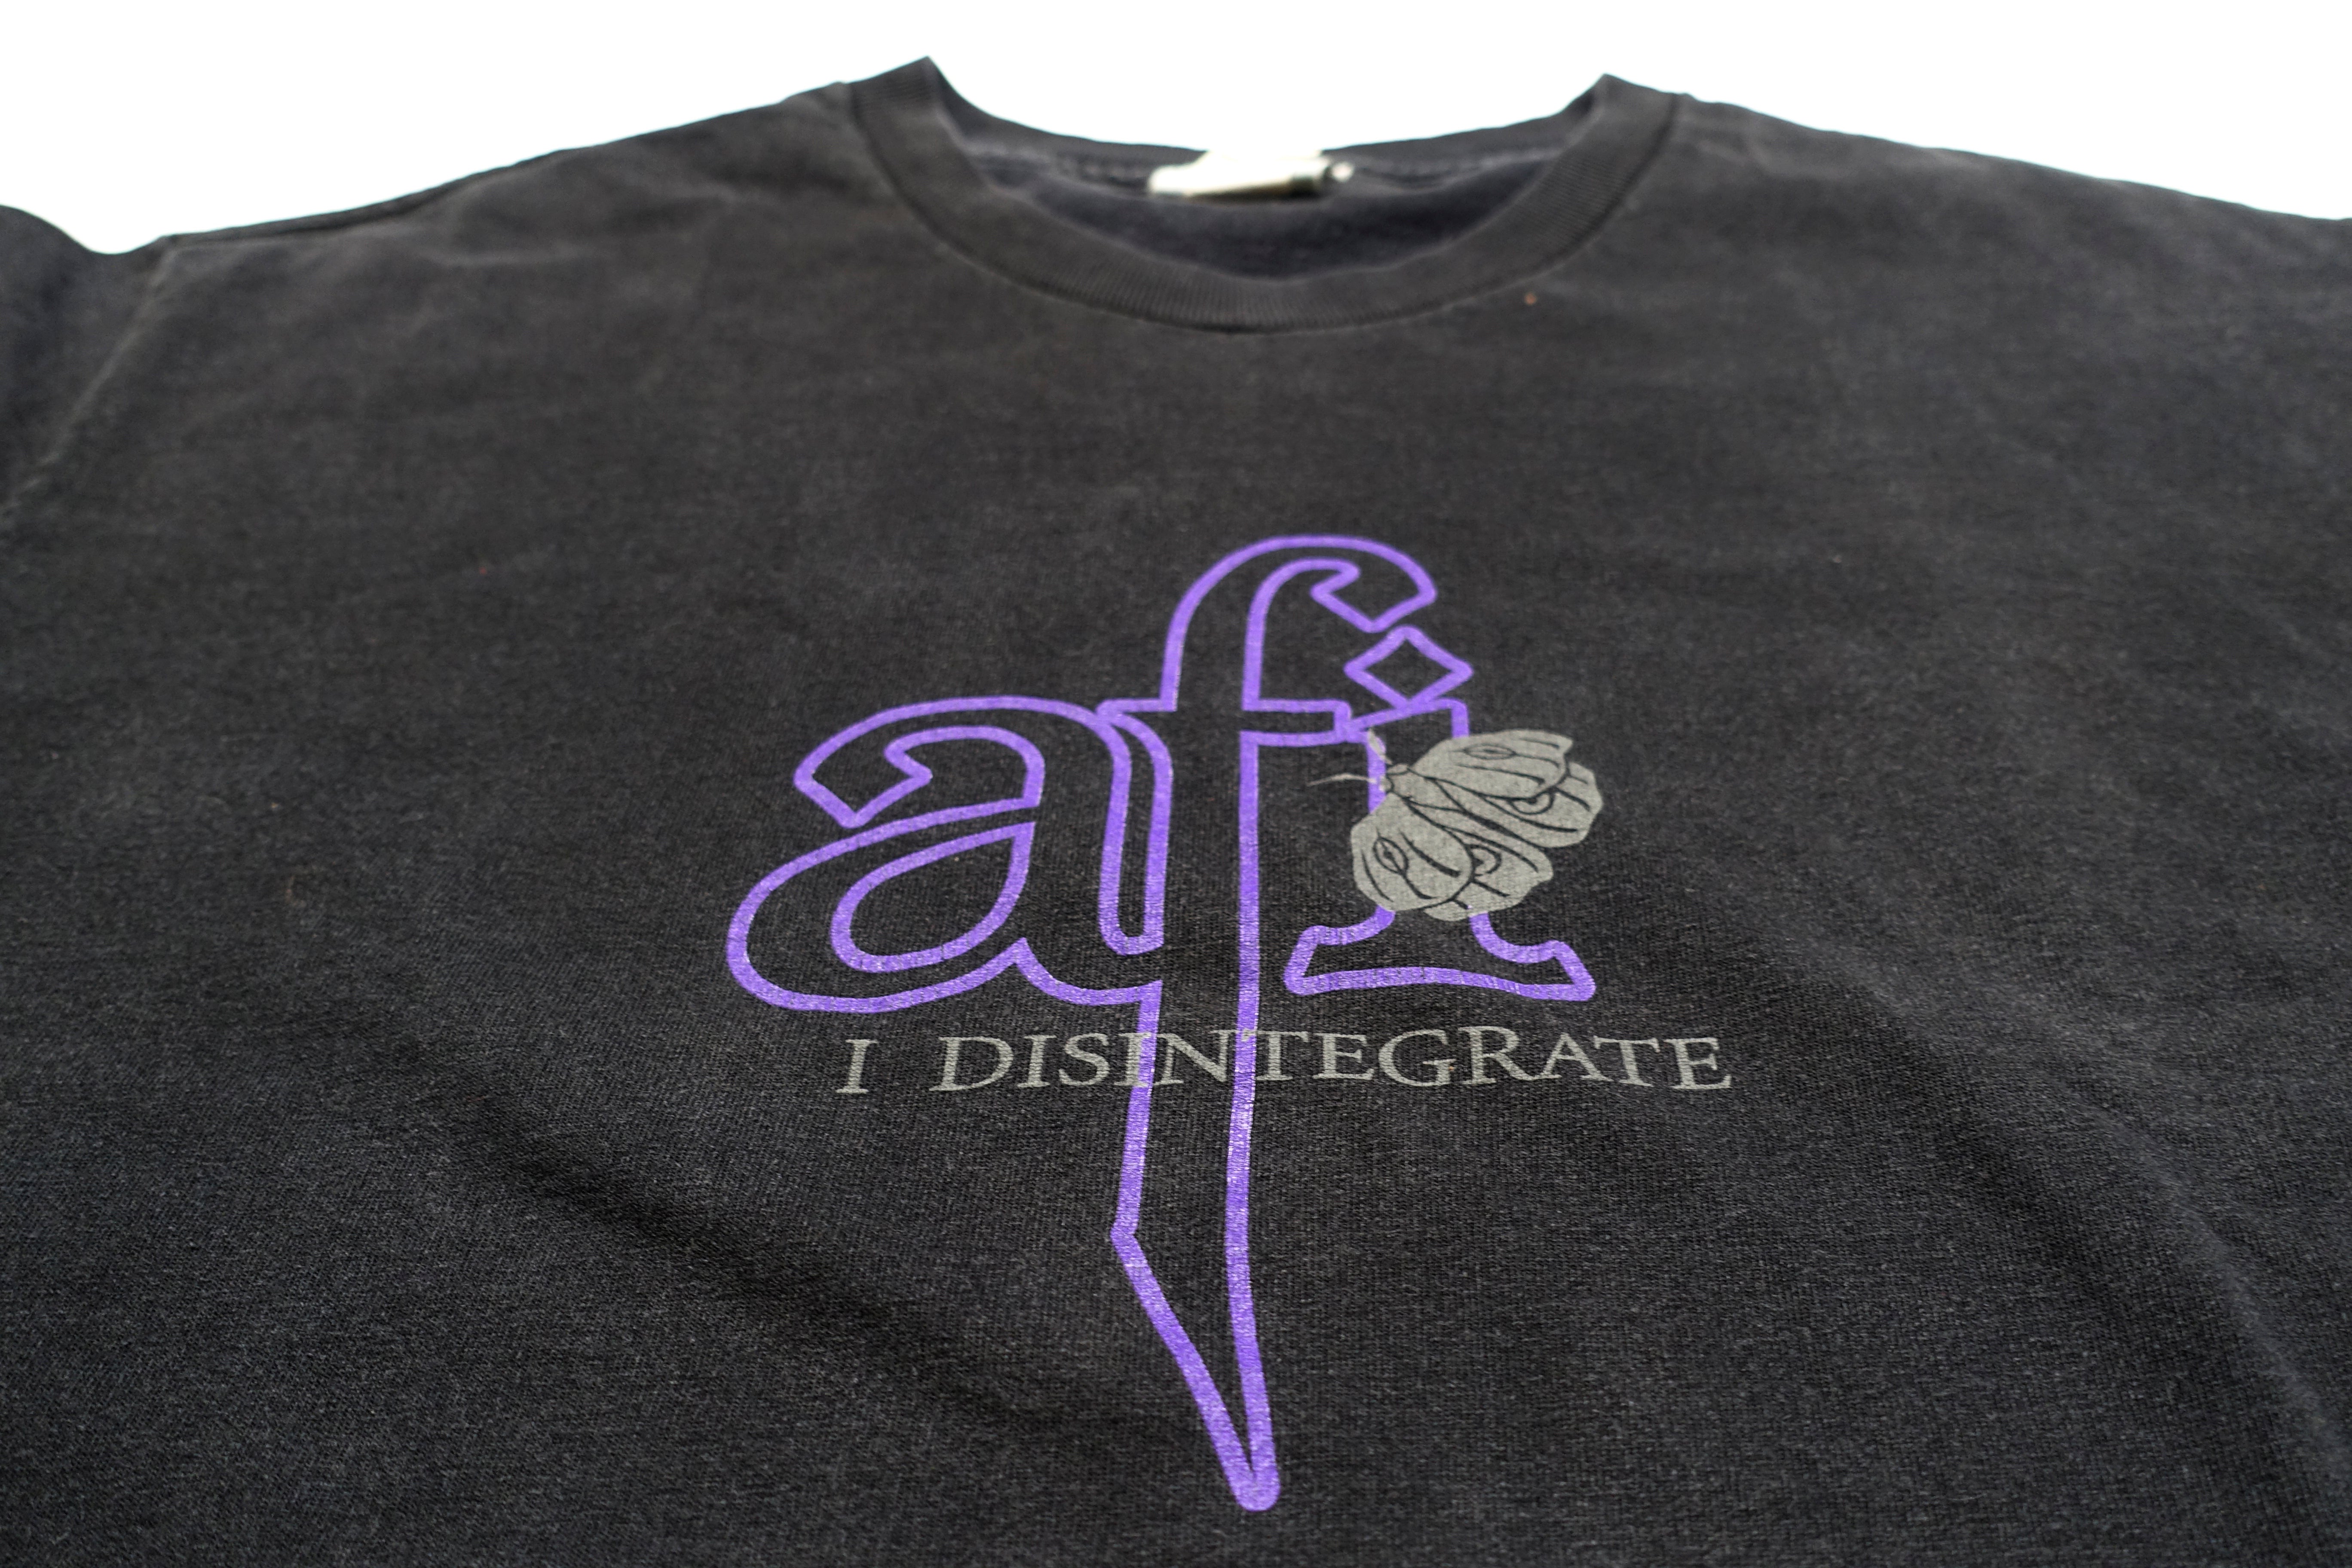 AFI - This Hate Is Fucking Real / Sing the Sorrow 2003 Tour Shirt Size Large